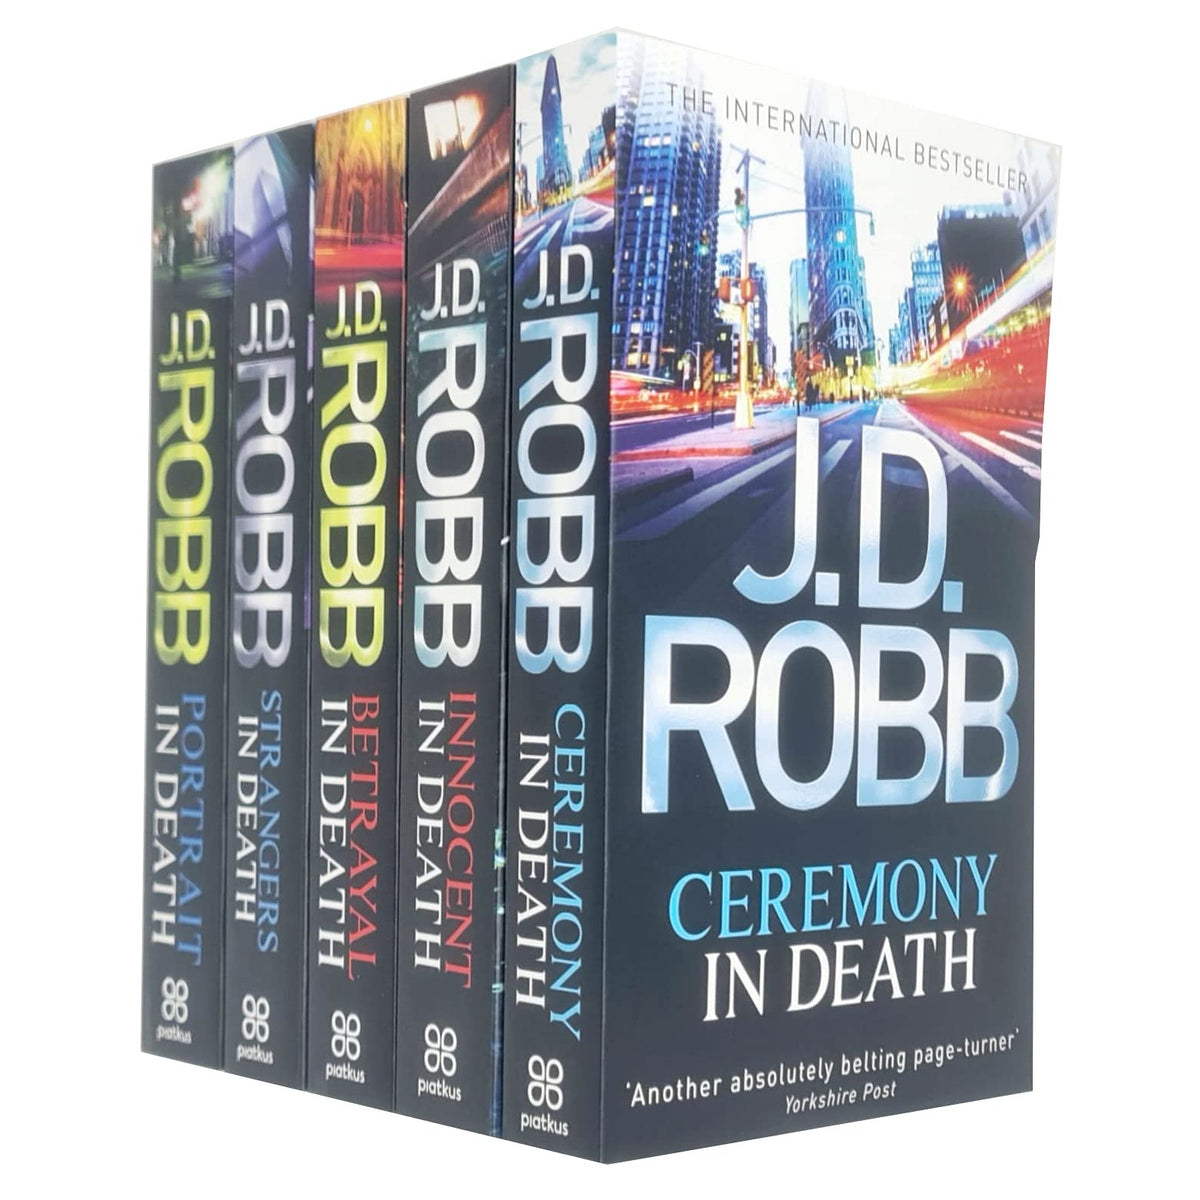 JD Robb In Death Series 5 Books Collection Set (Ceremony In Death